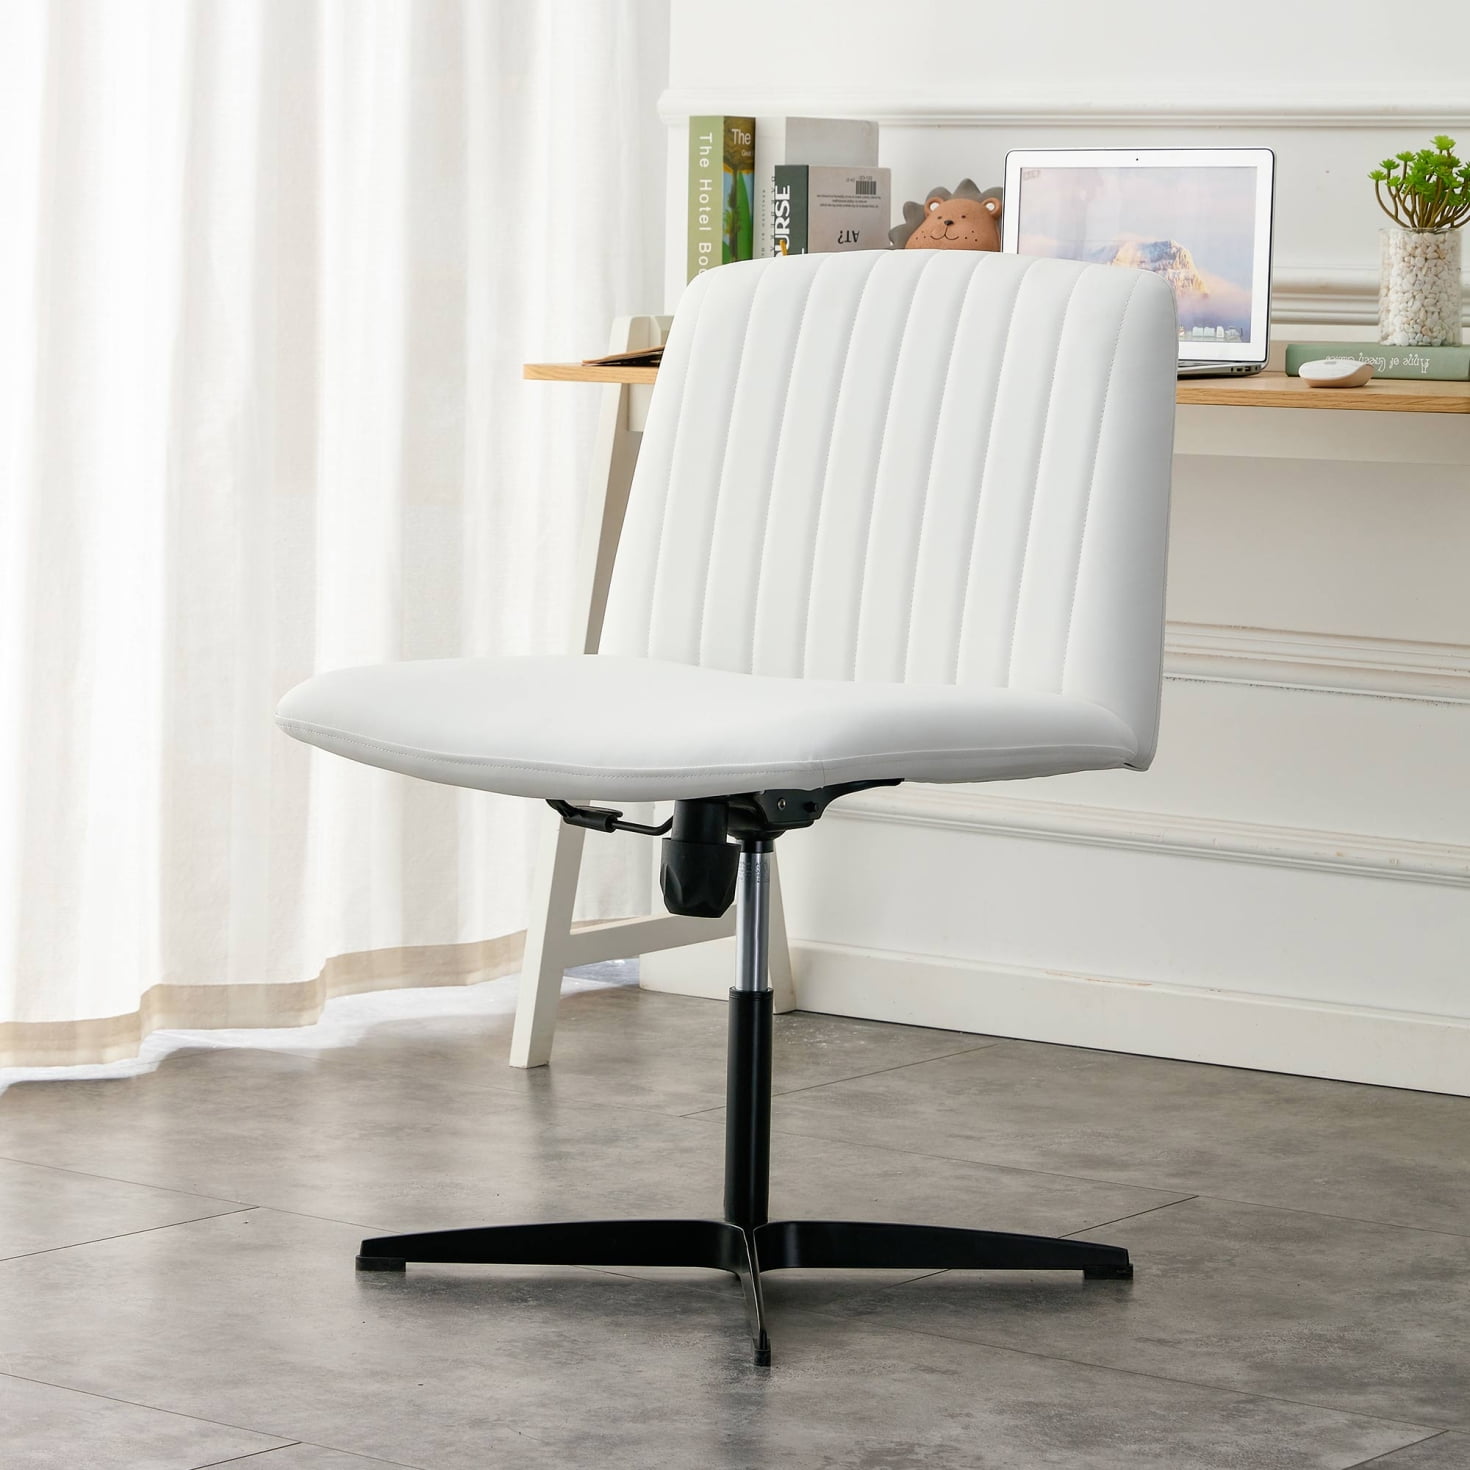 SeekFancy Criss Cross Legged Office Chair, White Armless Desk Chair No  Wheels, Wide Seat Home Office Chair, Pu Leather Adjustable 360 Swivel  Vanity